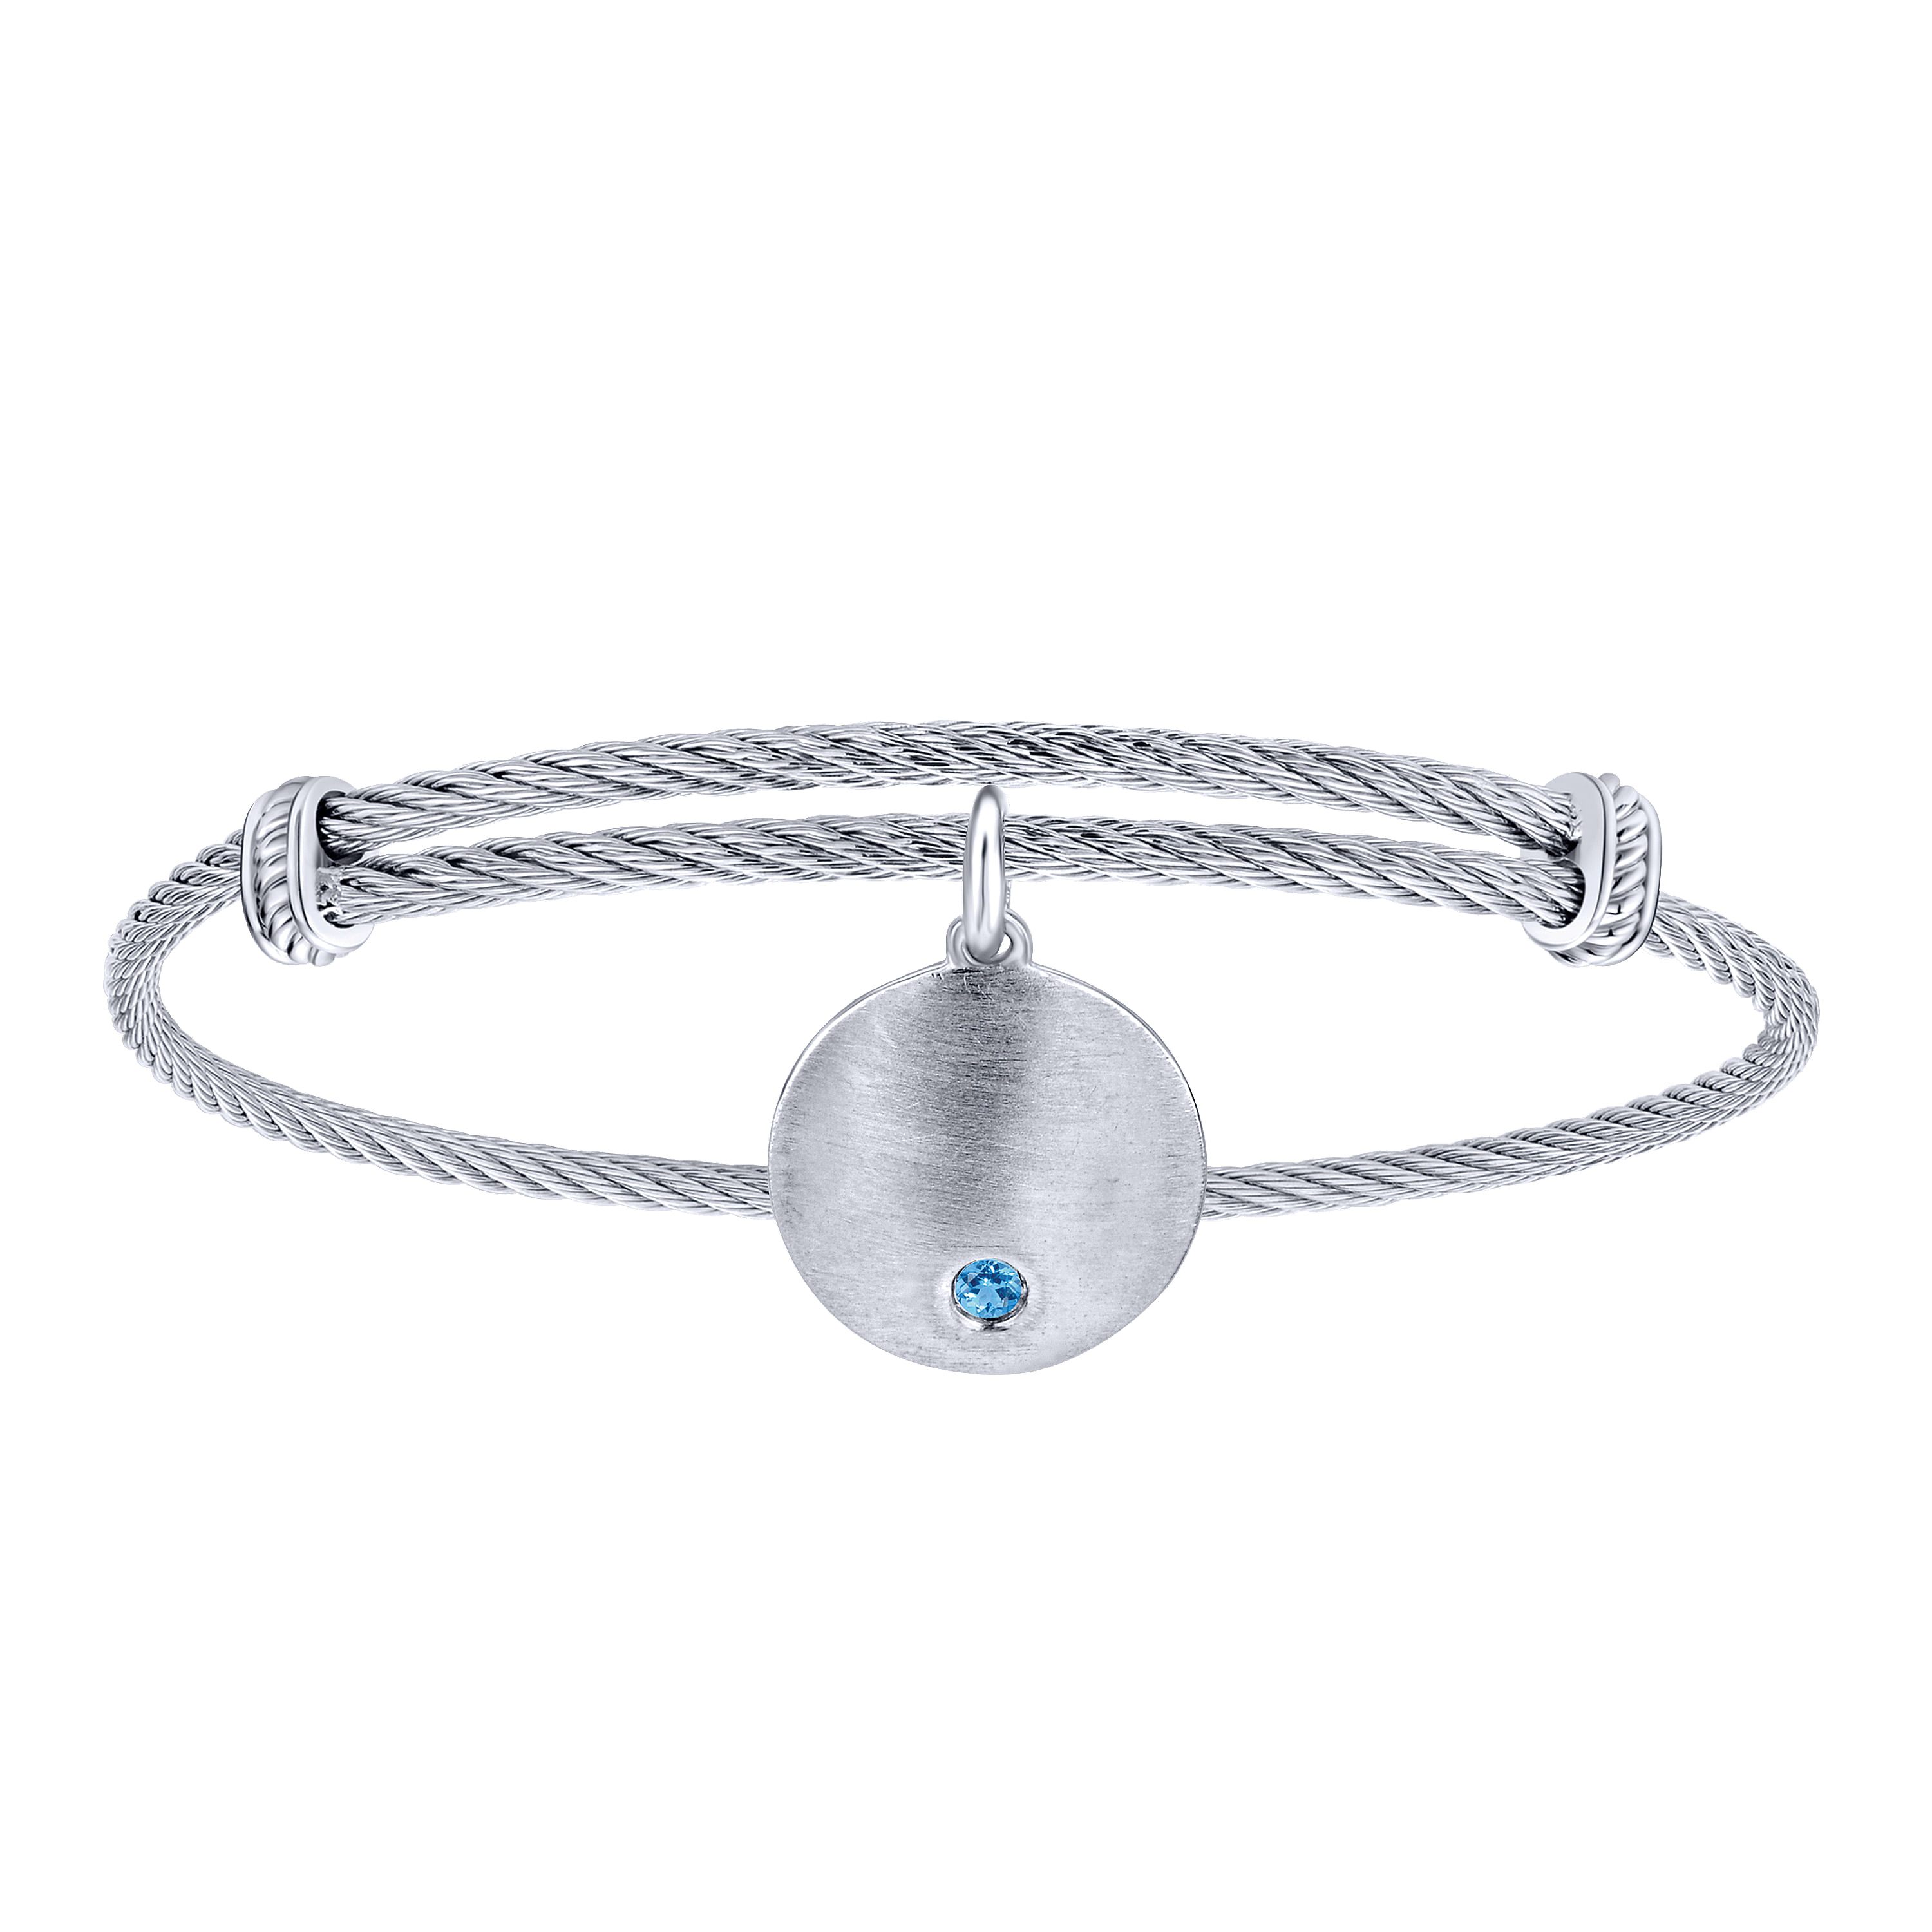 Adjustable Stainless Steel Bangle with Round Sterling Silver Blue Topaz Stone Disc Charm